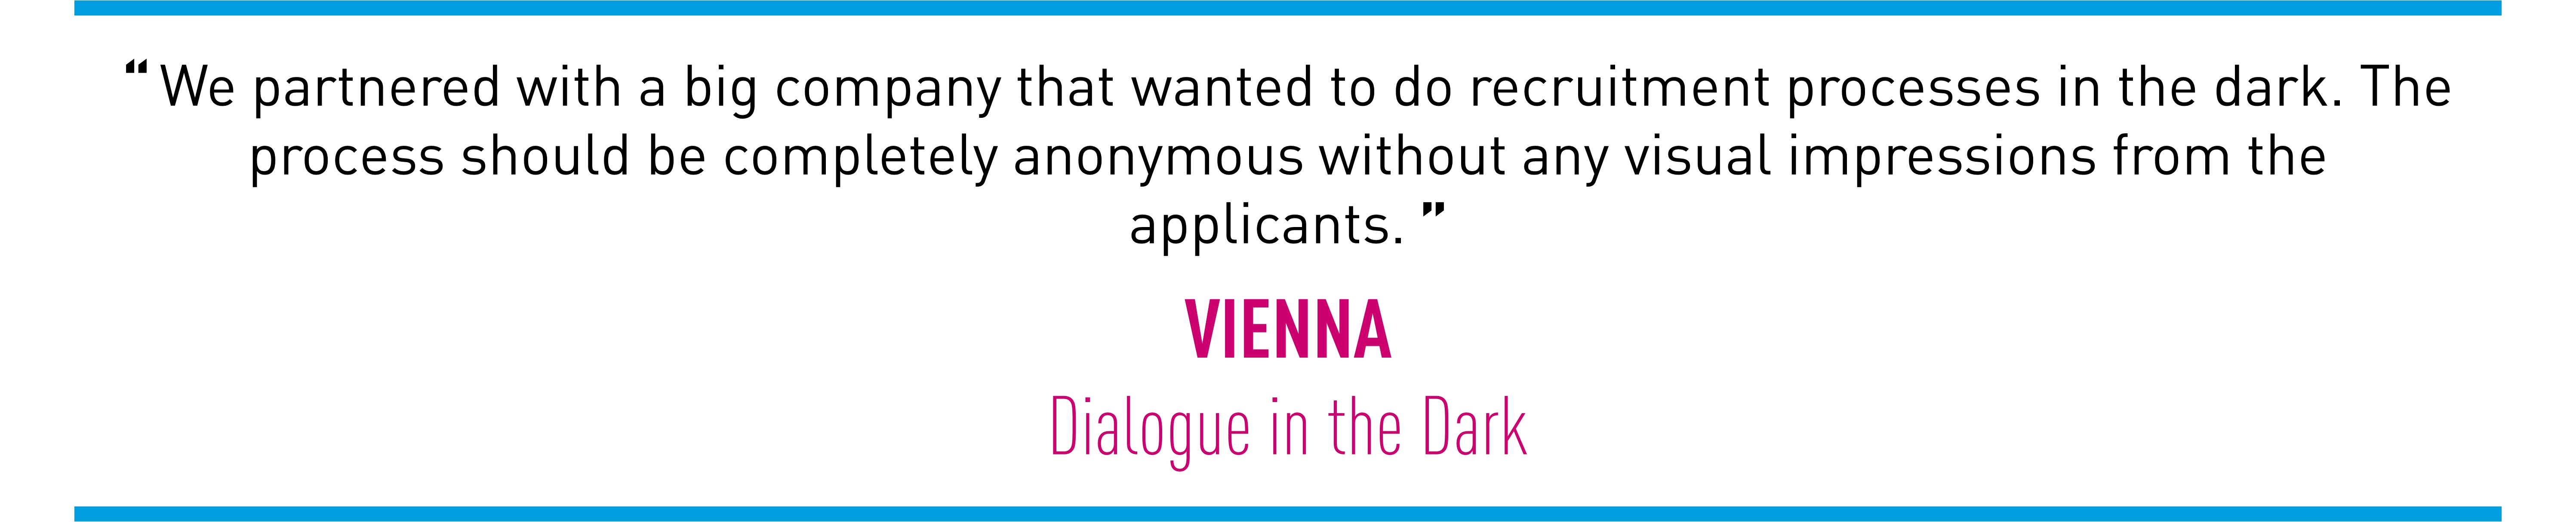 We partnered with a big company that wanted to do recruitment processes in the dark. The process should be completely anonymous without any visual impressions from the applicants. (VIENNA Dialogue in the Dark)